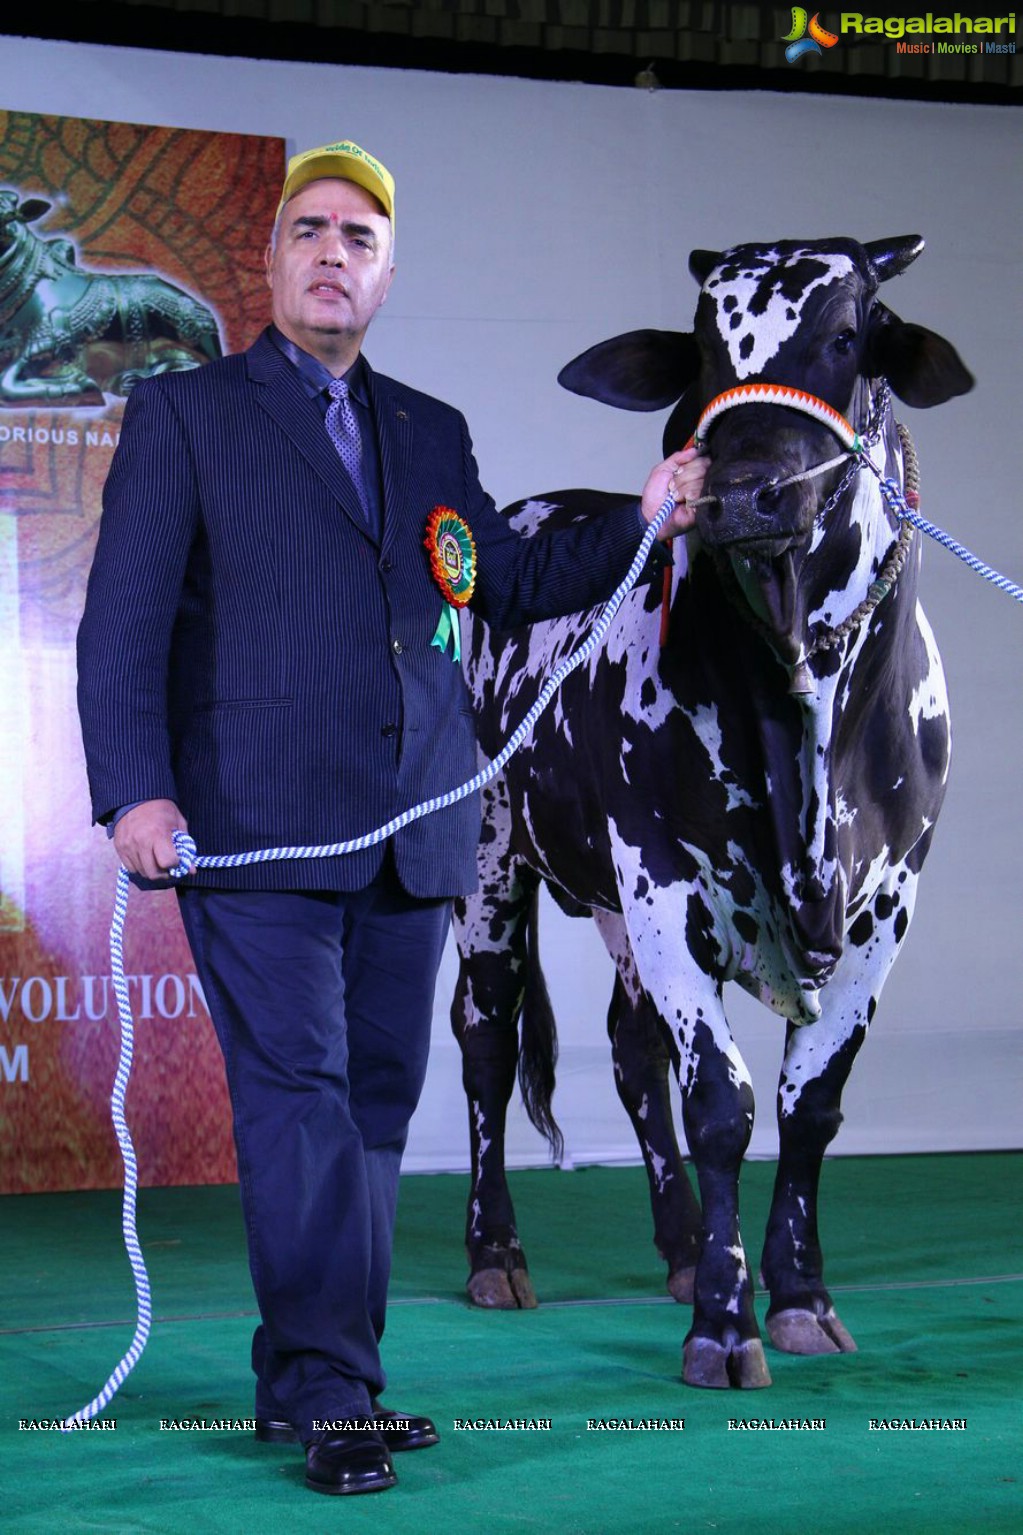 The Dream Bull Show in Hyderabad